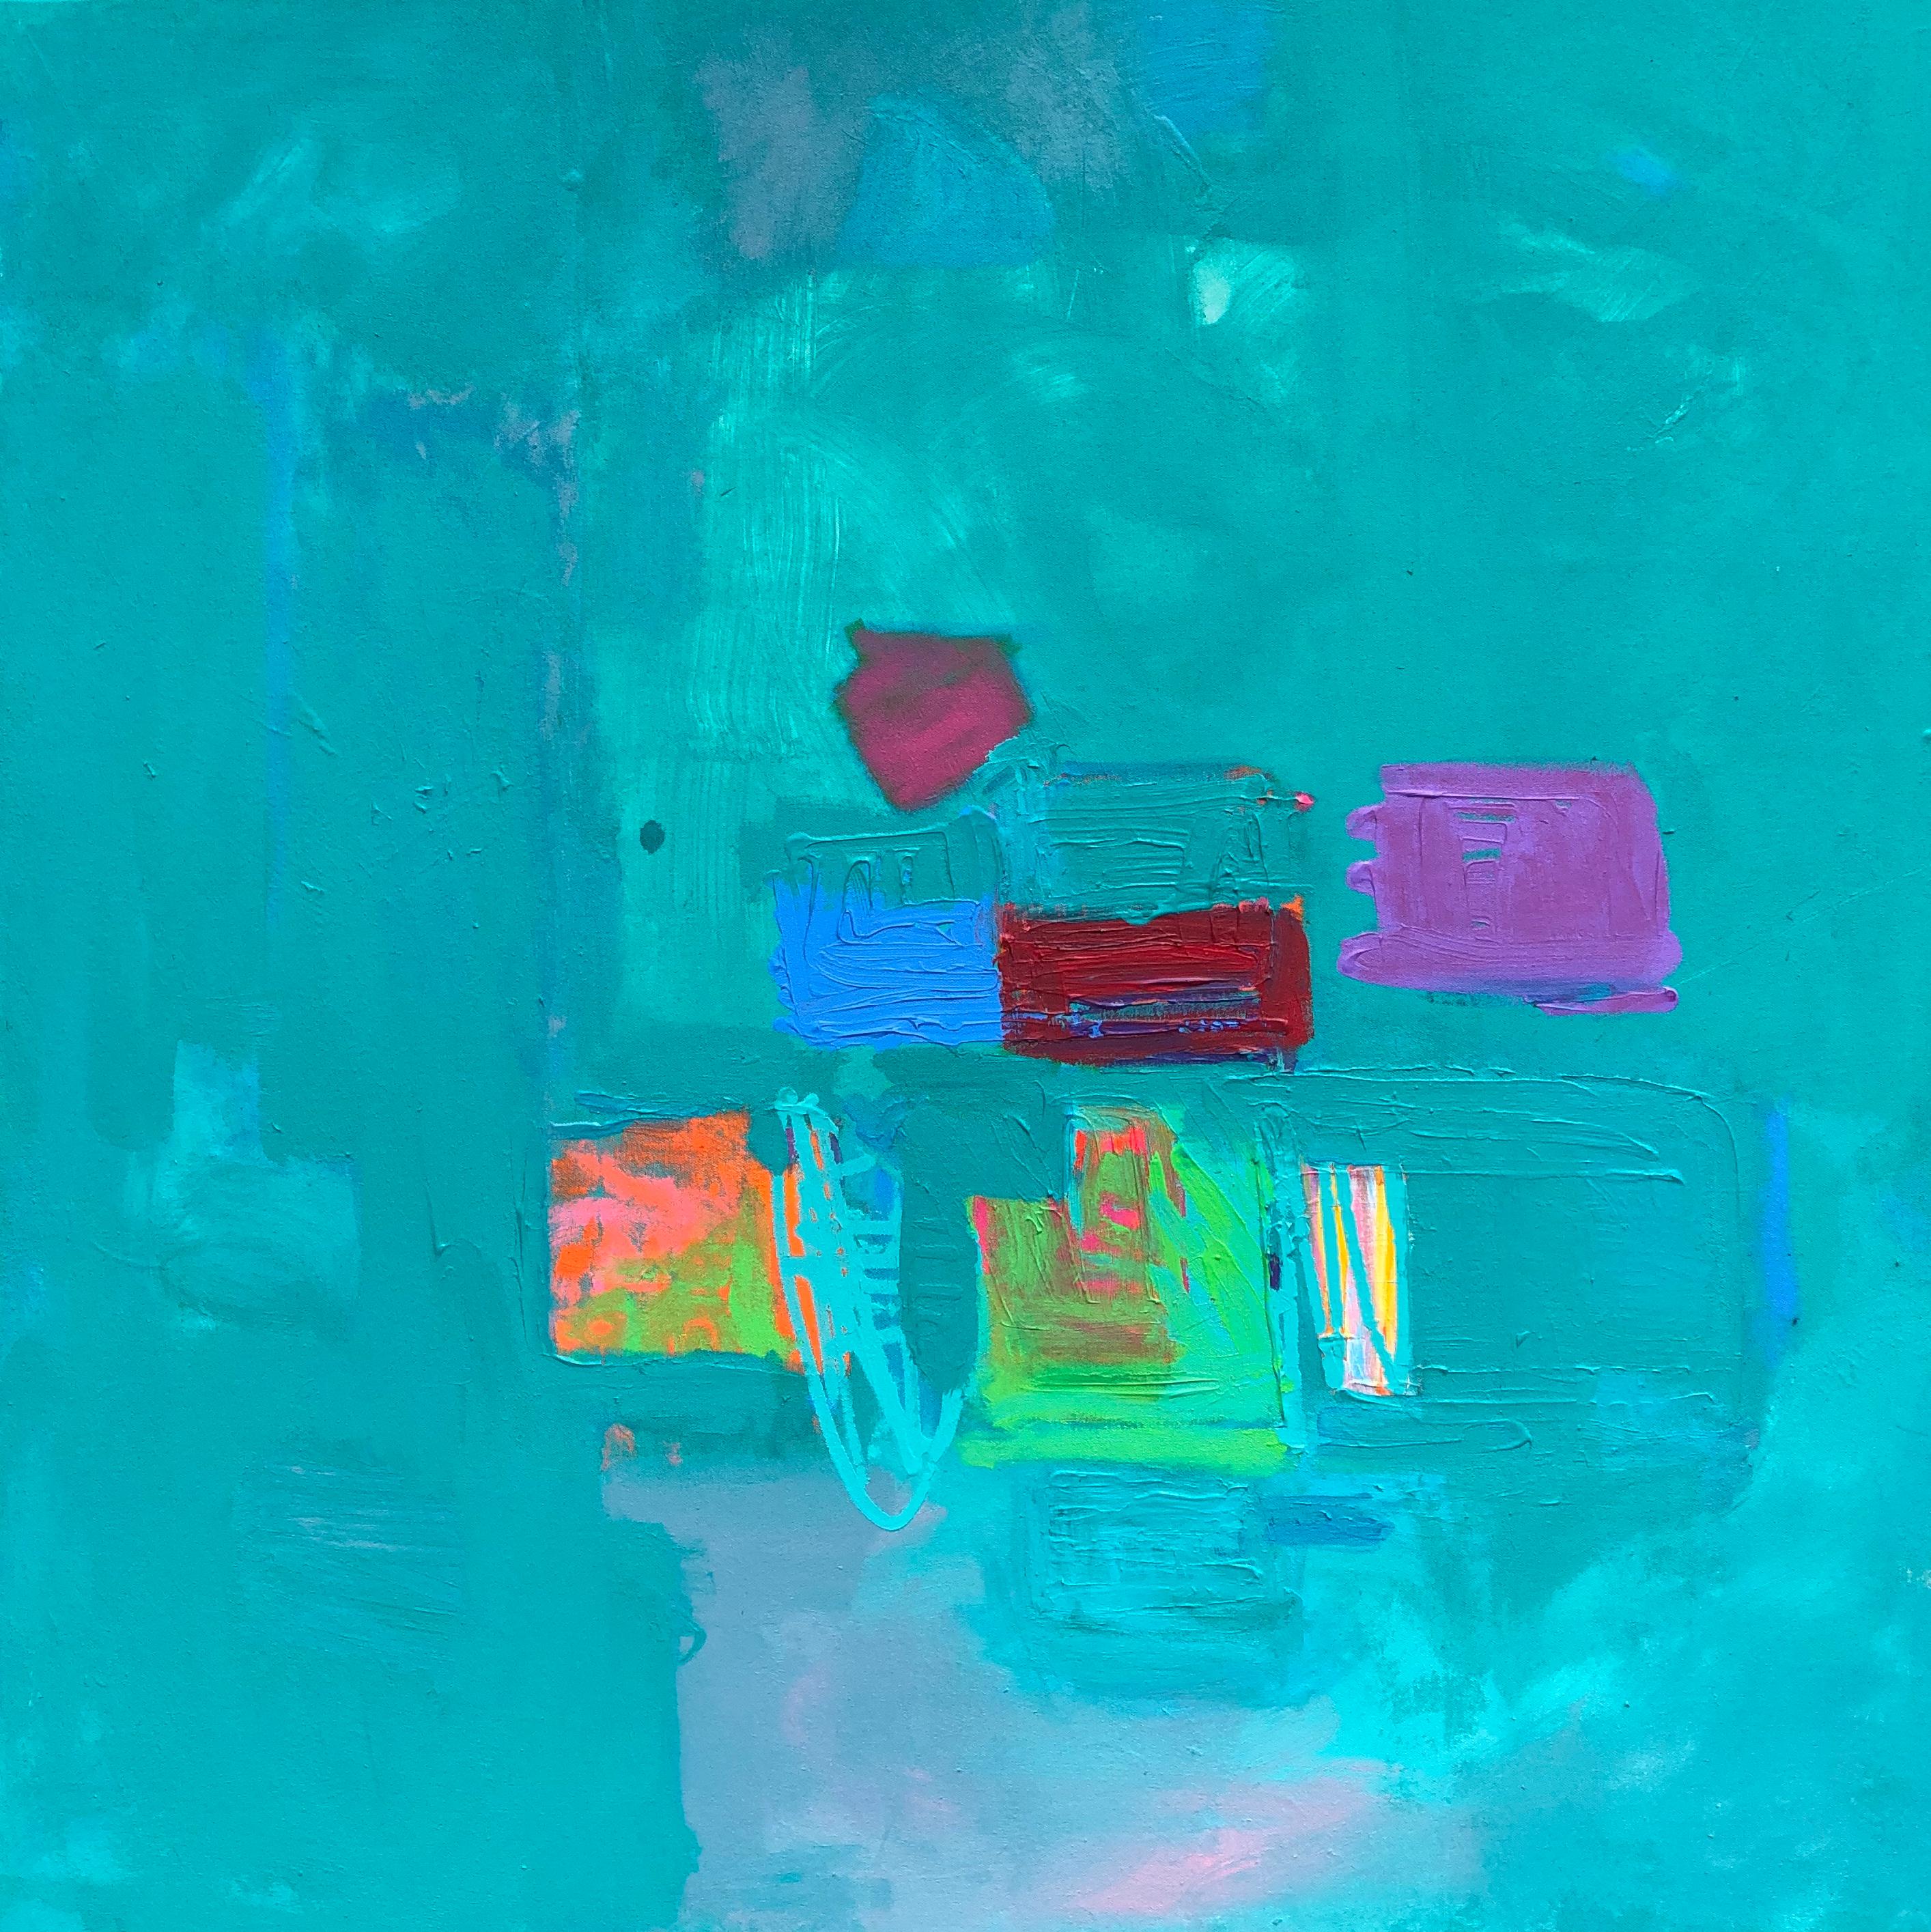 John Blee Abstract Painting - "Orchard/The Sudden Places" This turquoise painterly abstract canvas says ocean